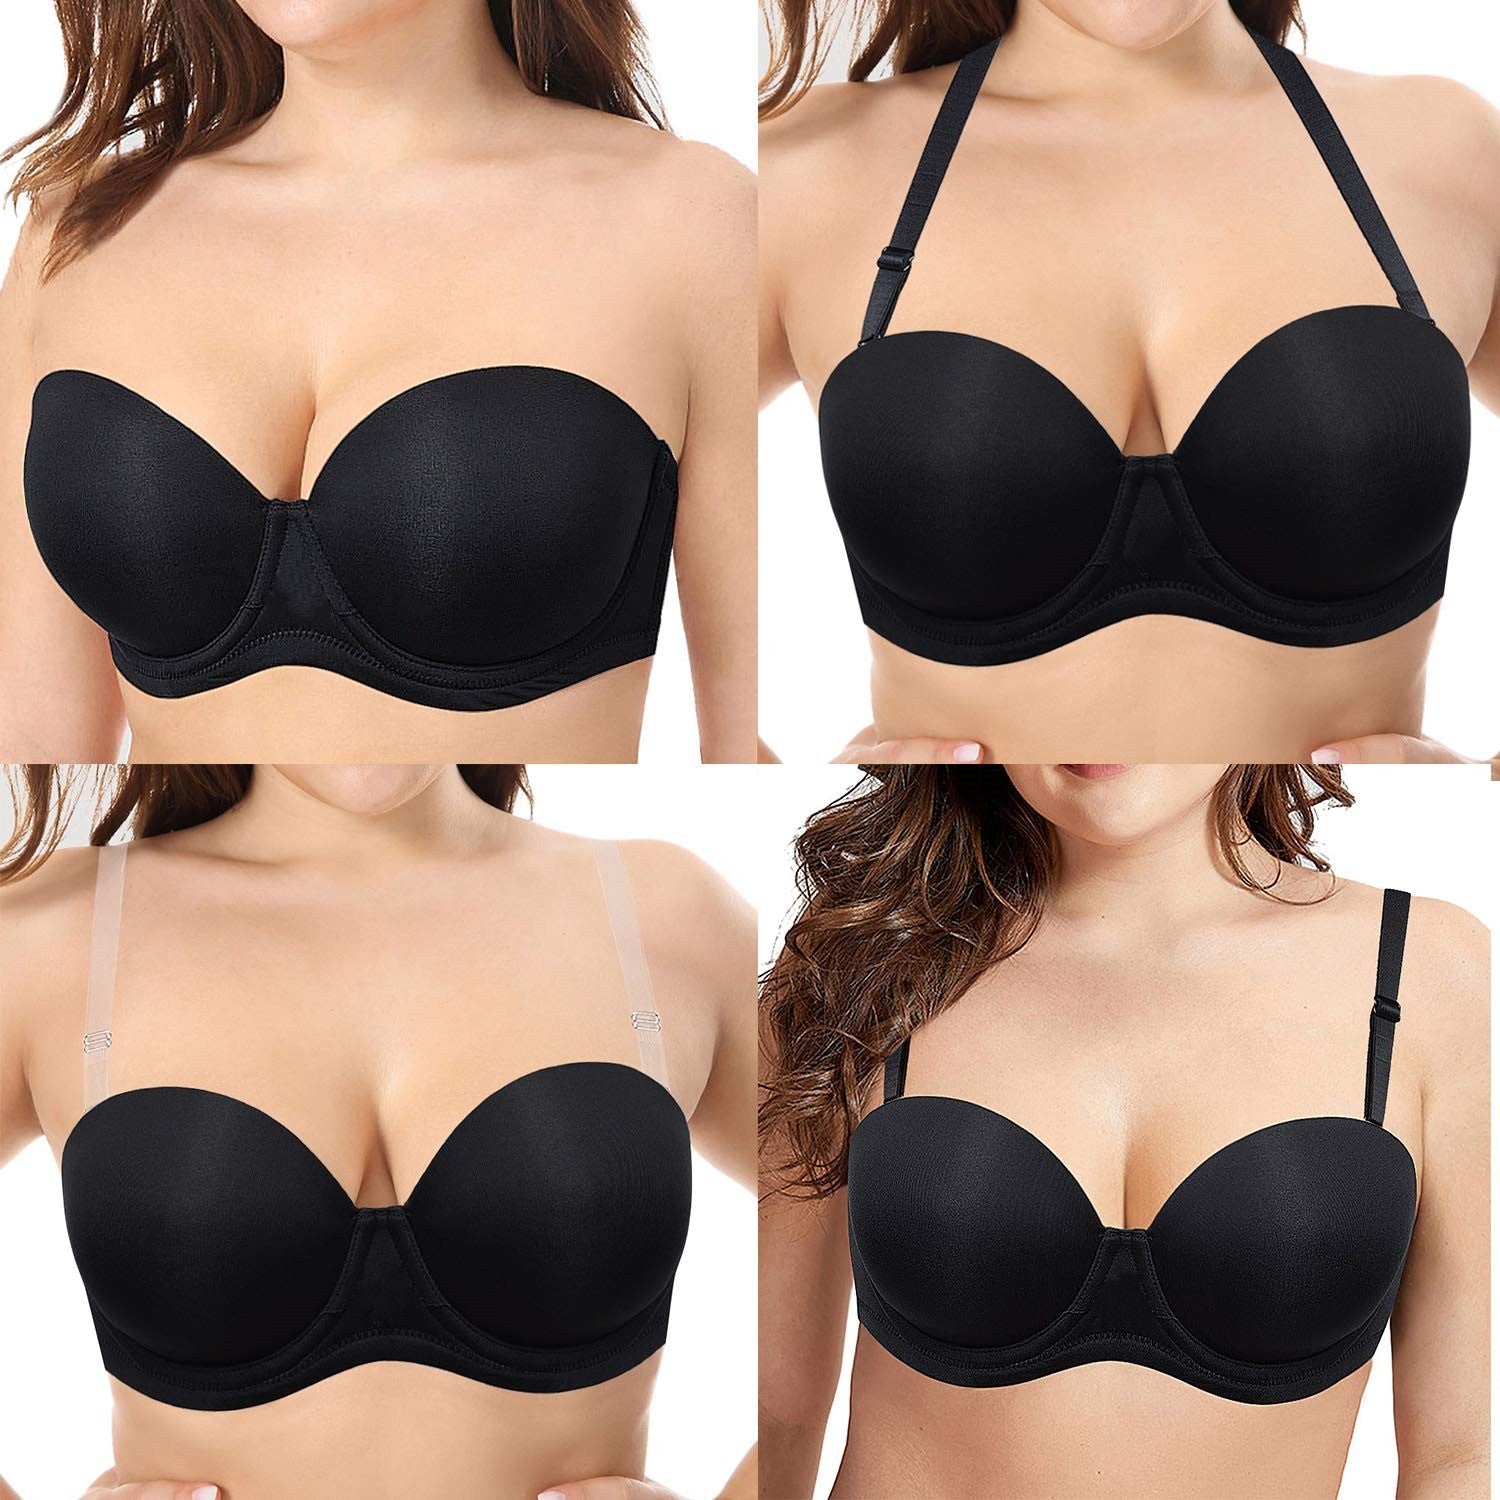 Wirefree Thin Padding Bras That Minimize And Flatter - Full Coverage  Underwire Push Up Bras That Shape & Support